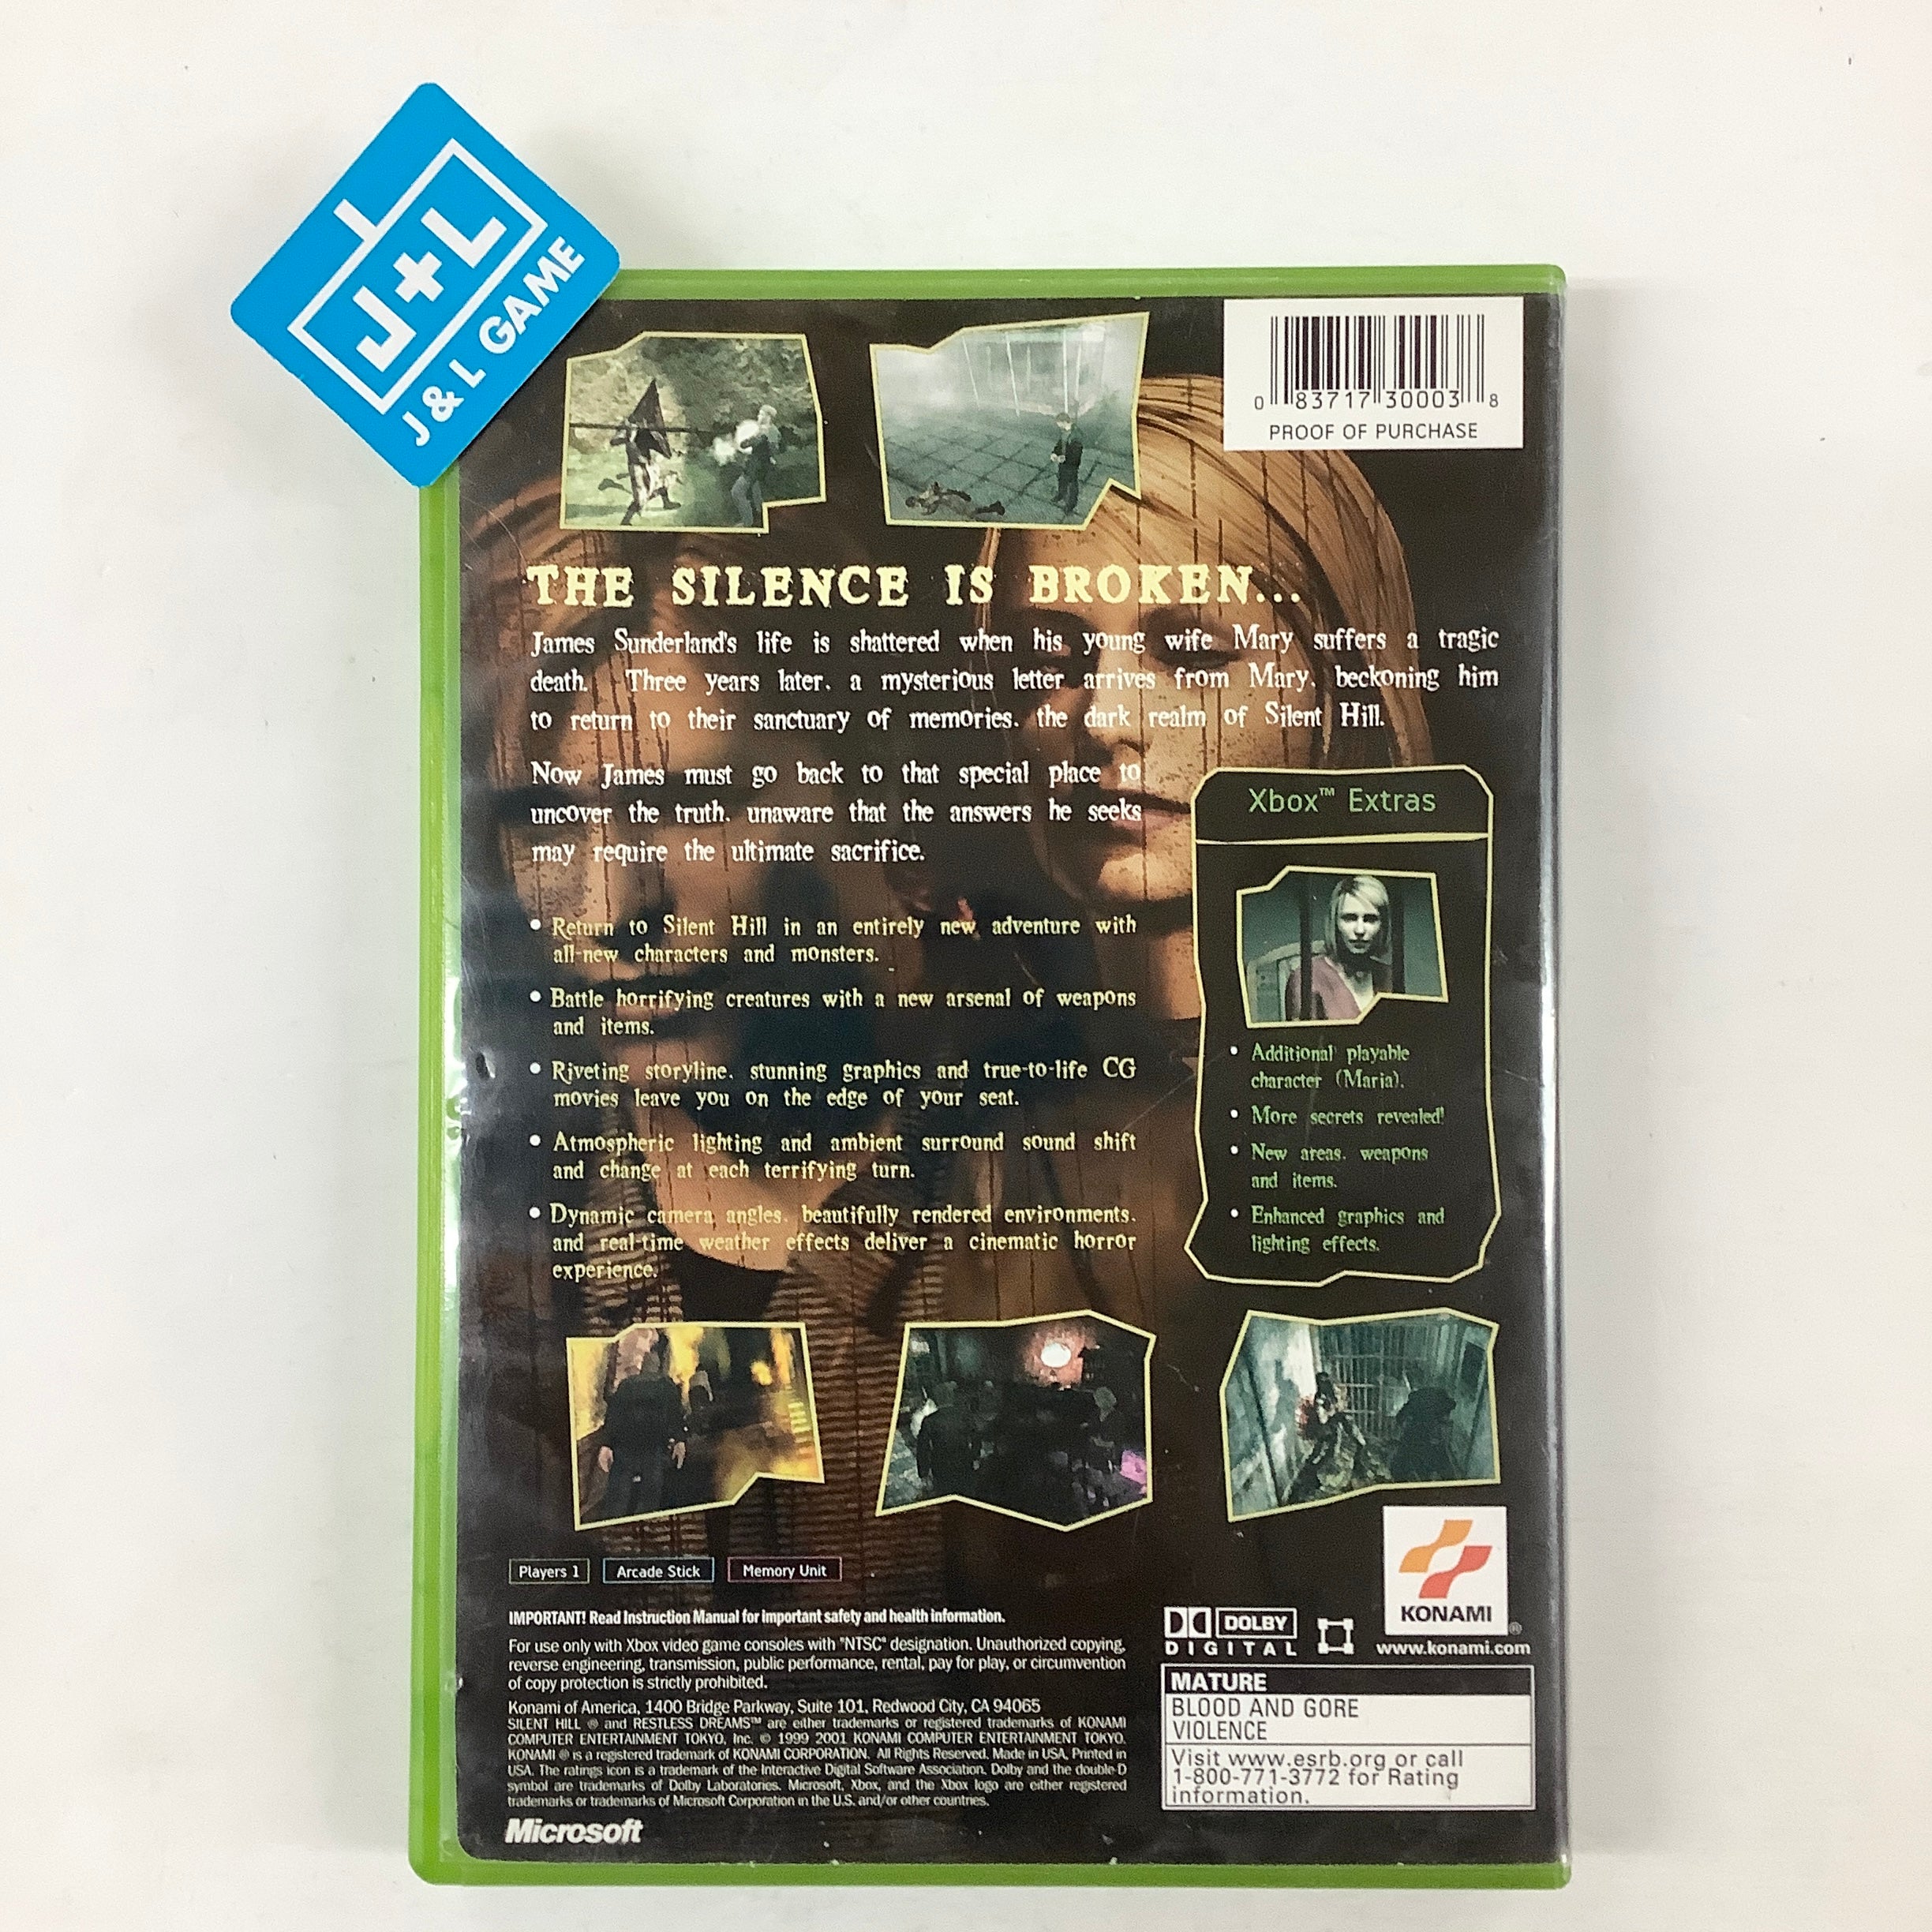 Silent Hill 2: Restless Dreams - (XB) Xbox [Pre-Owned] Video Games Konami   